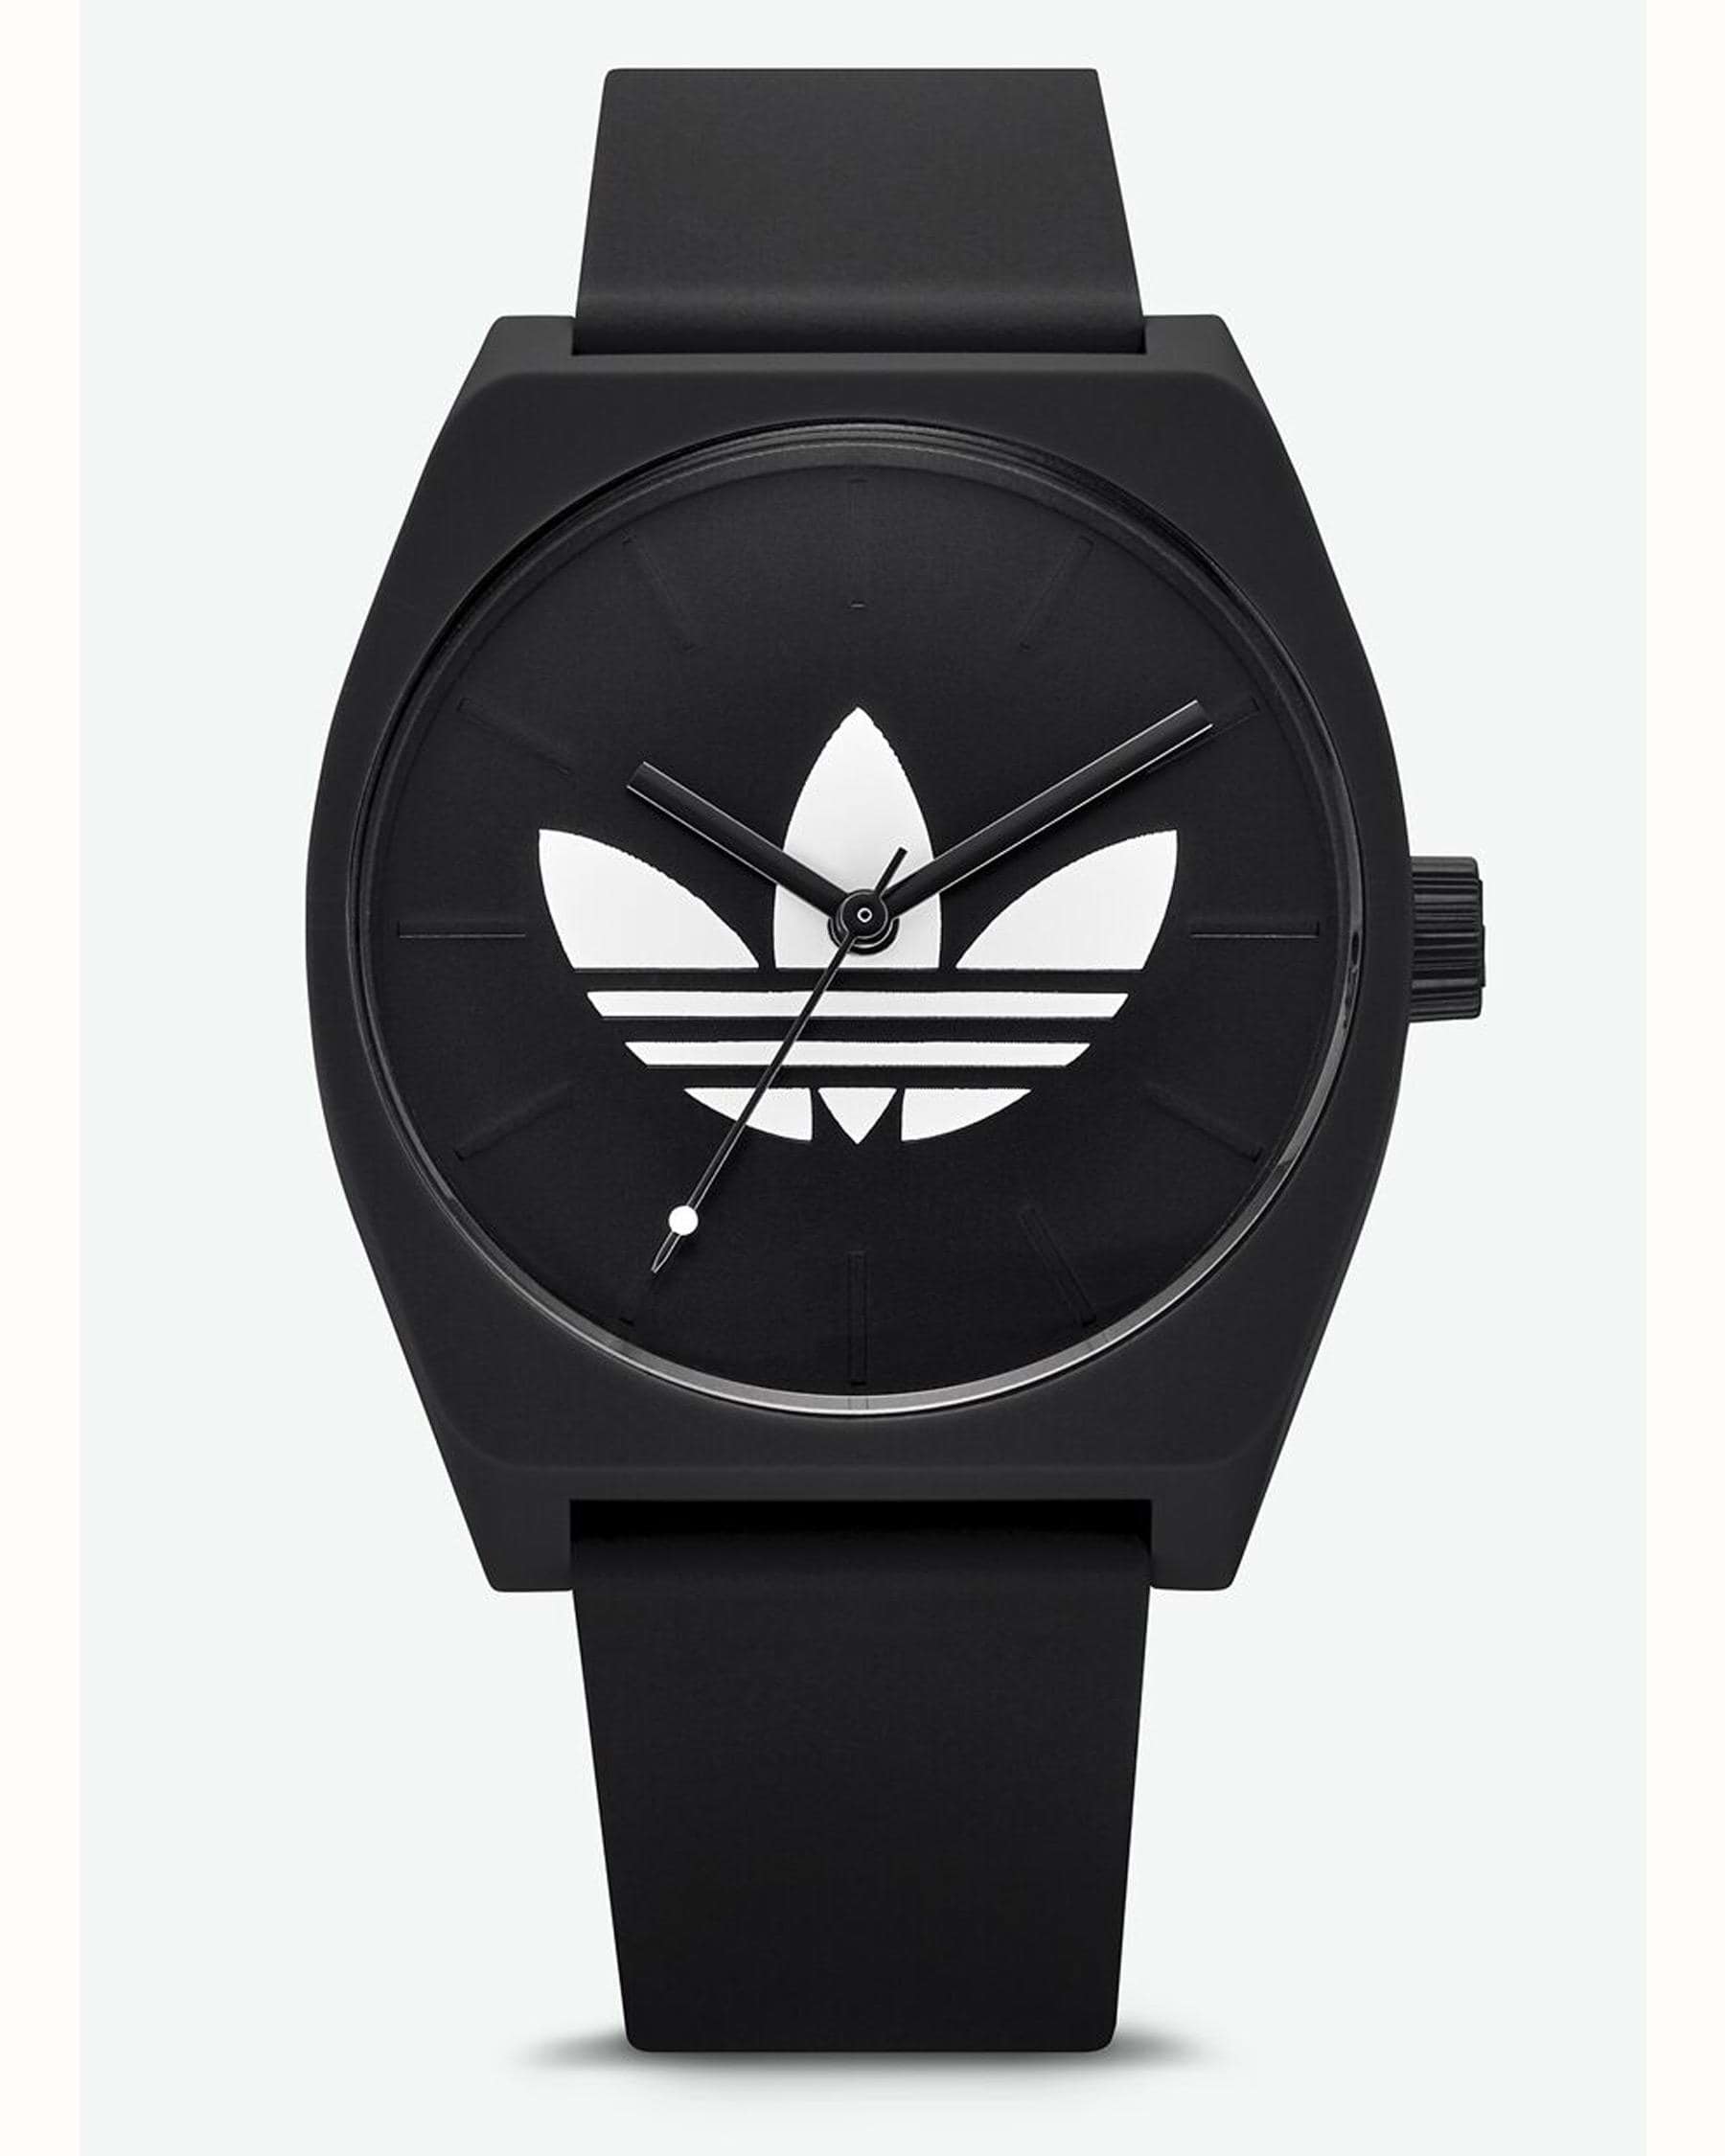 Adidas Process_SP1 Trefoil Watch In Black - Fast Shipping & Easy ...